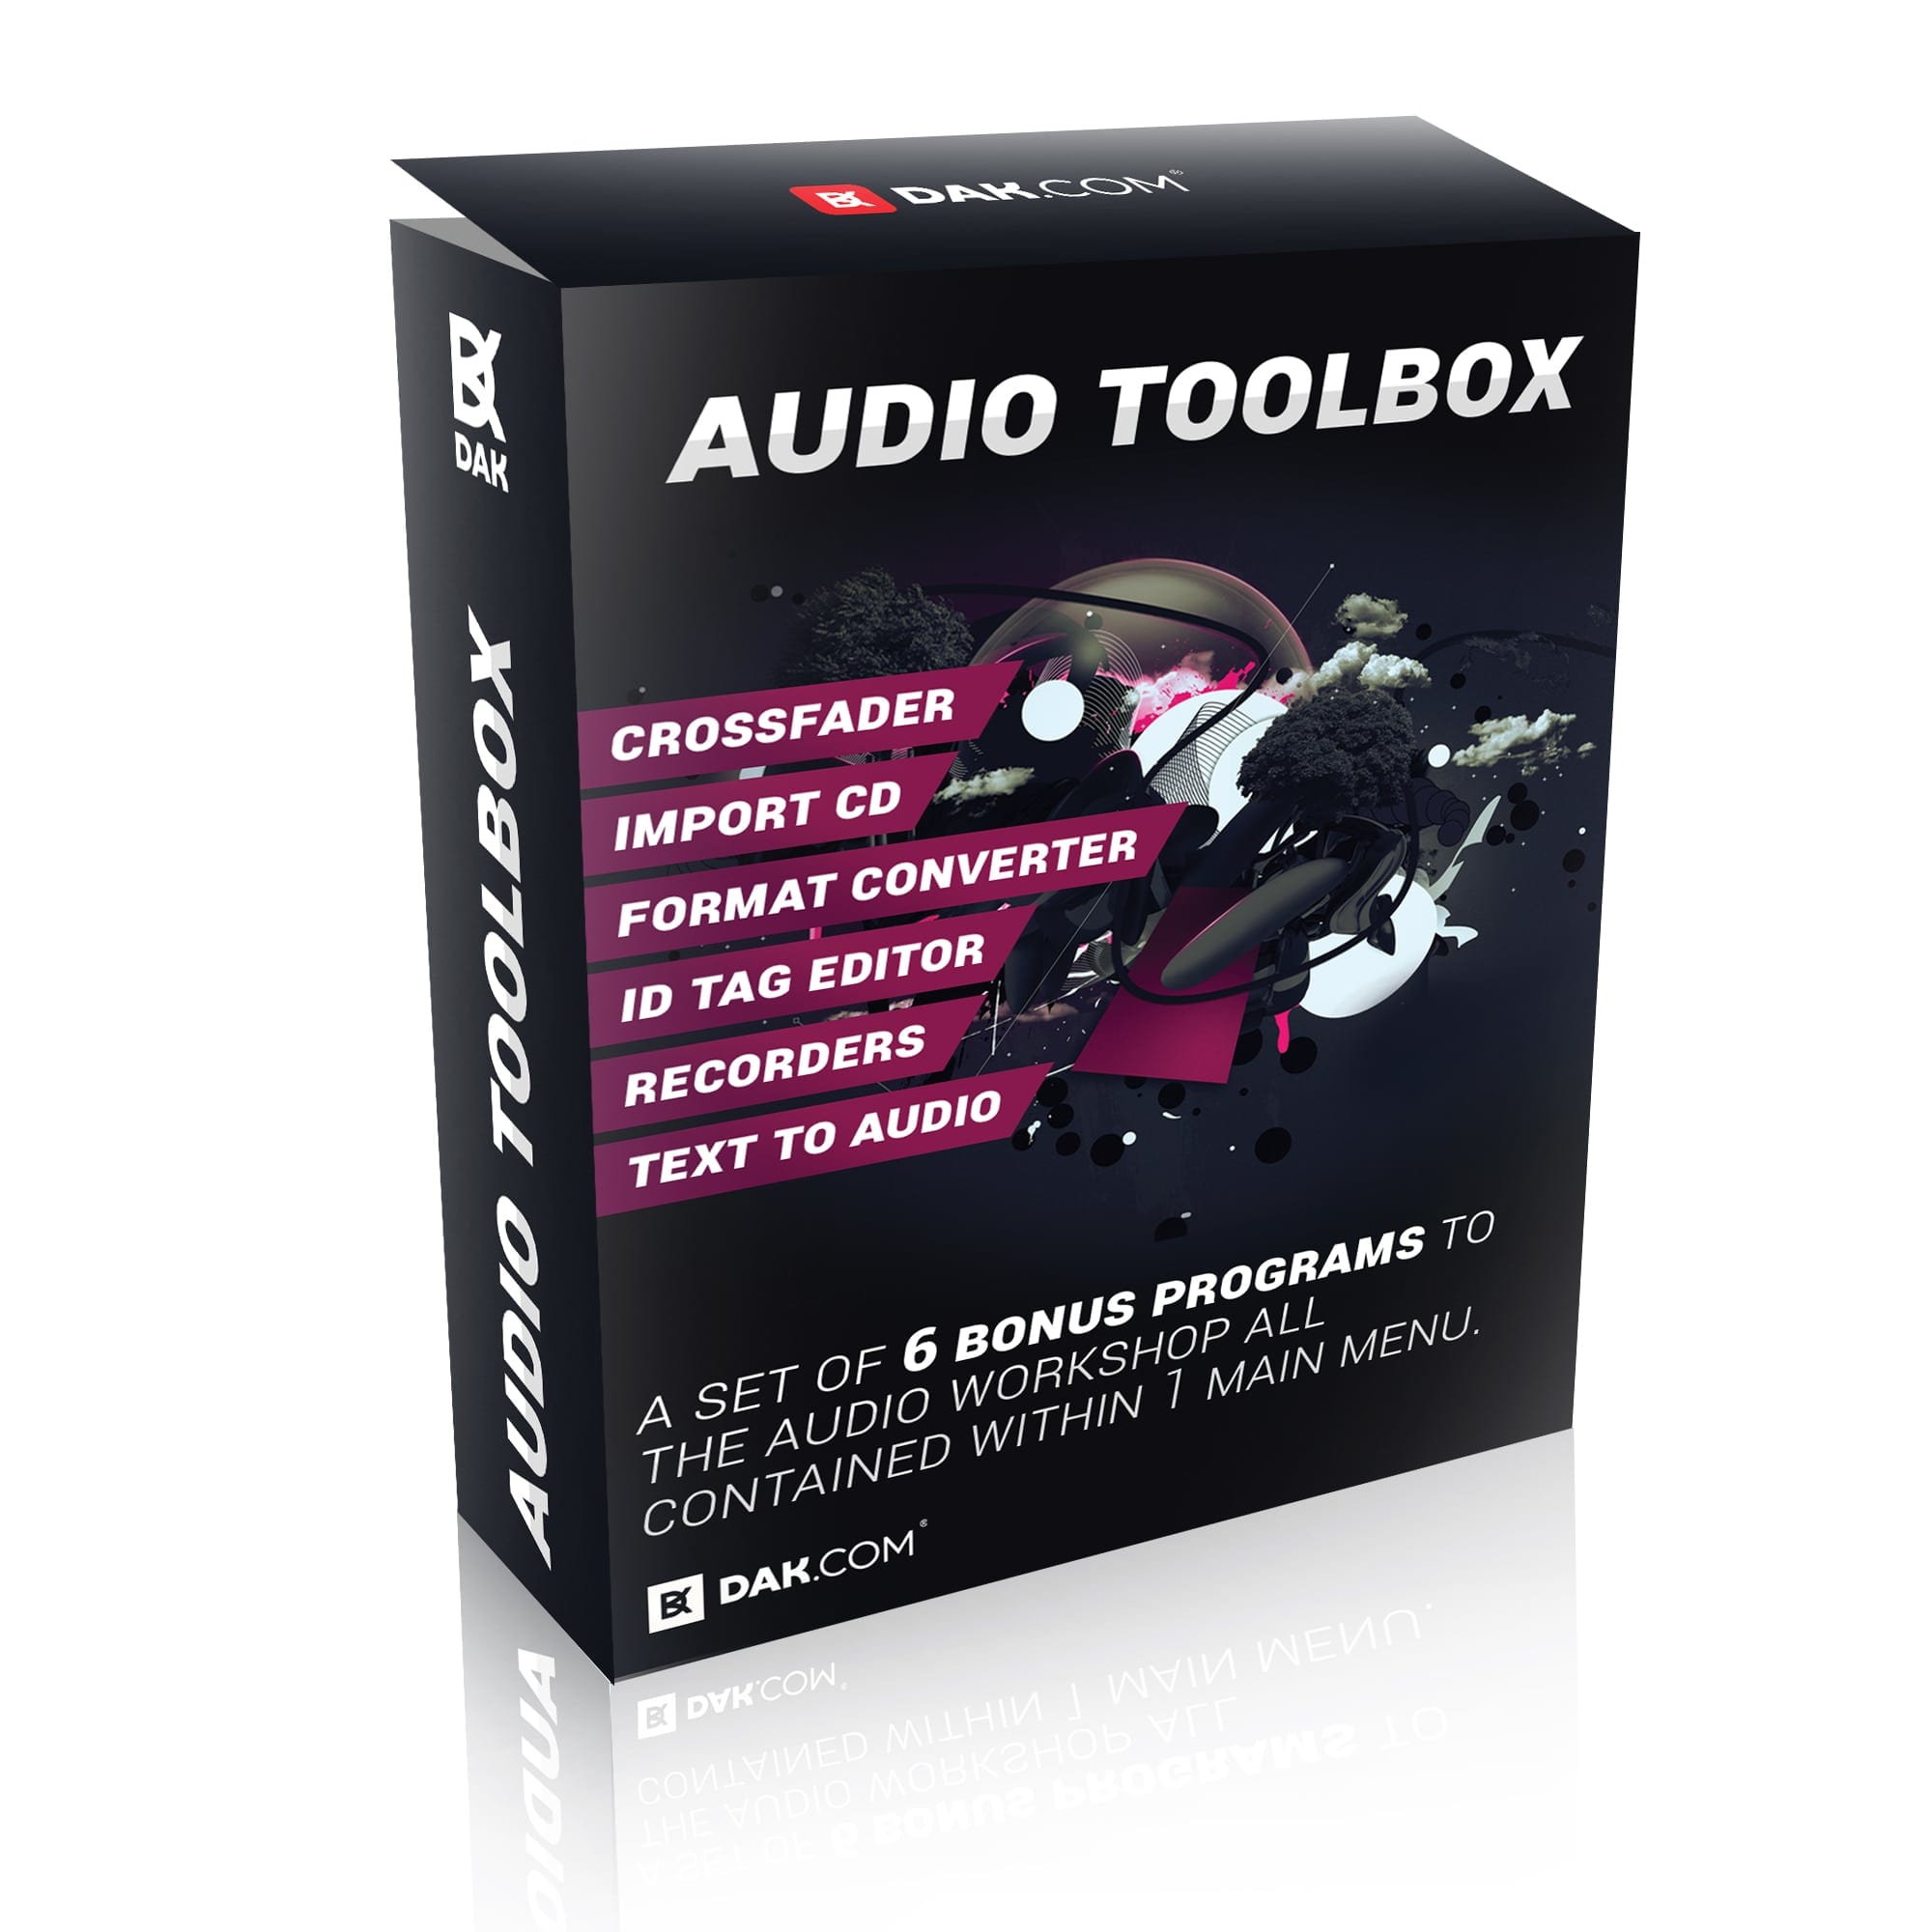 GiliSoft Audio Toolbox Suite 10.4 download the new version